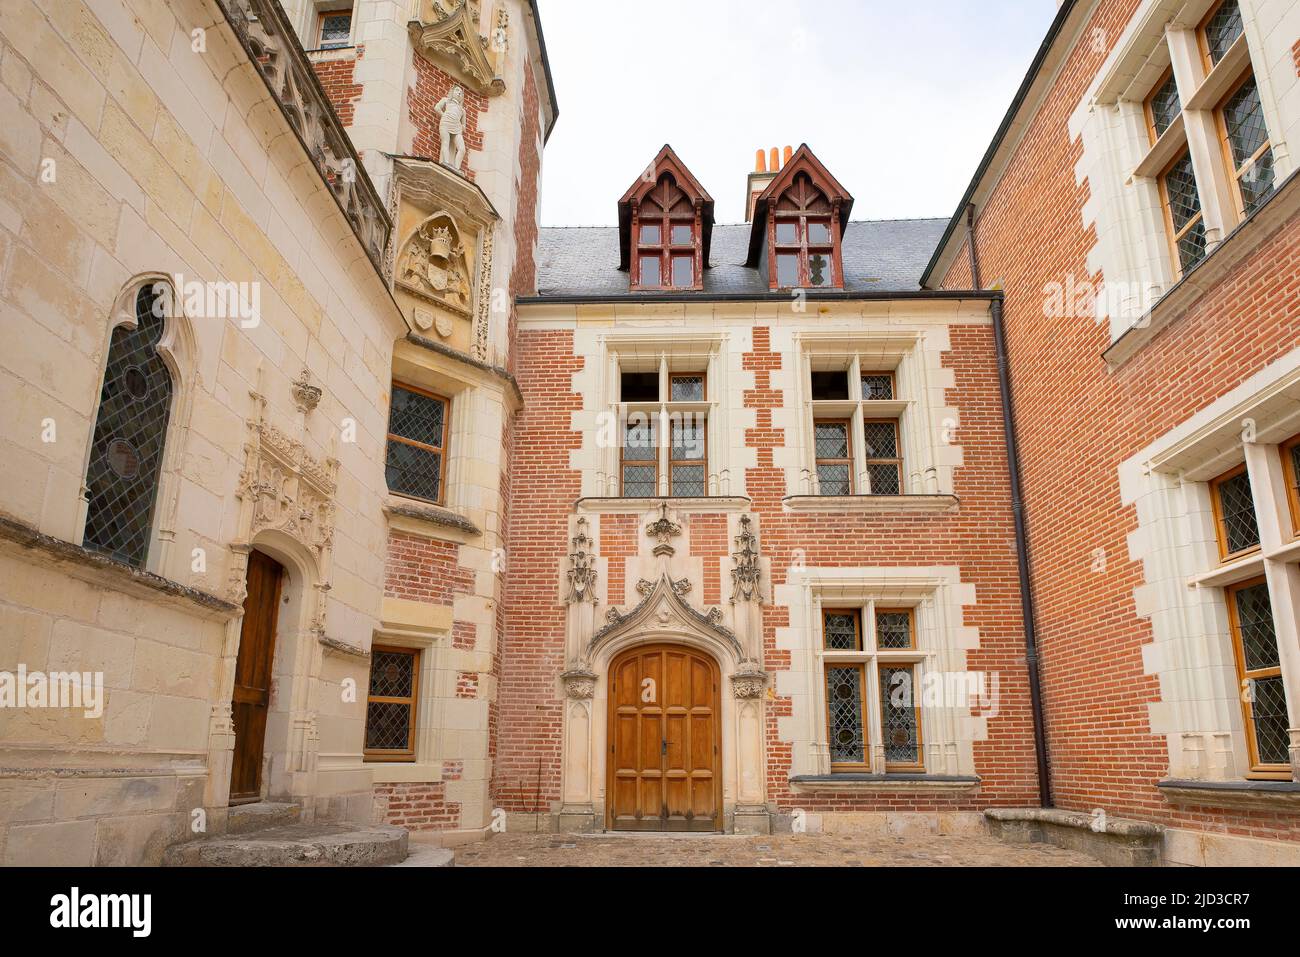 The Château du Clos Lucé, formerly called Manoir du Cloux, is a large château located in the center of Amboise, in the department of Indre-et-Loire, i Stock Photo